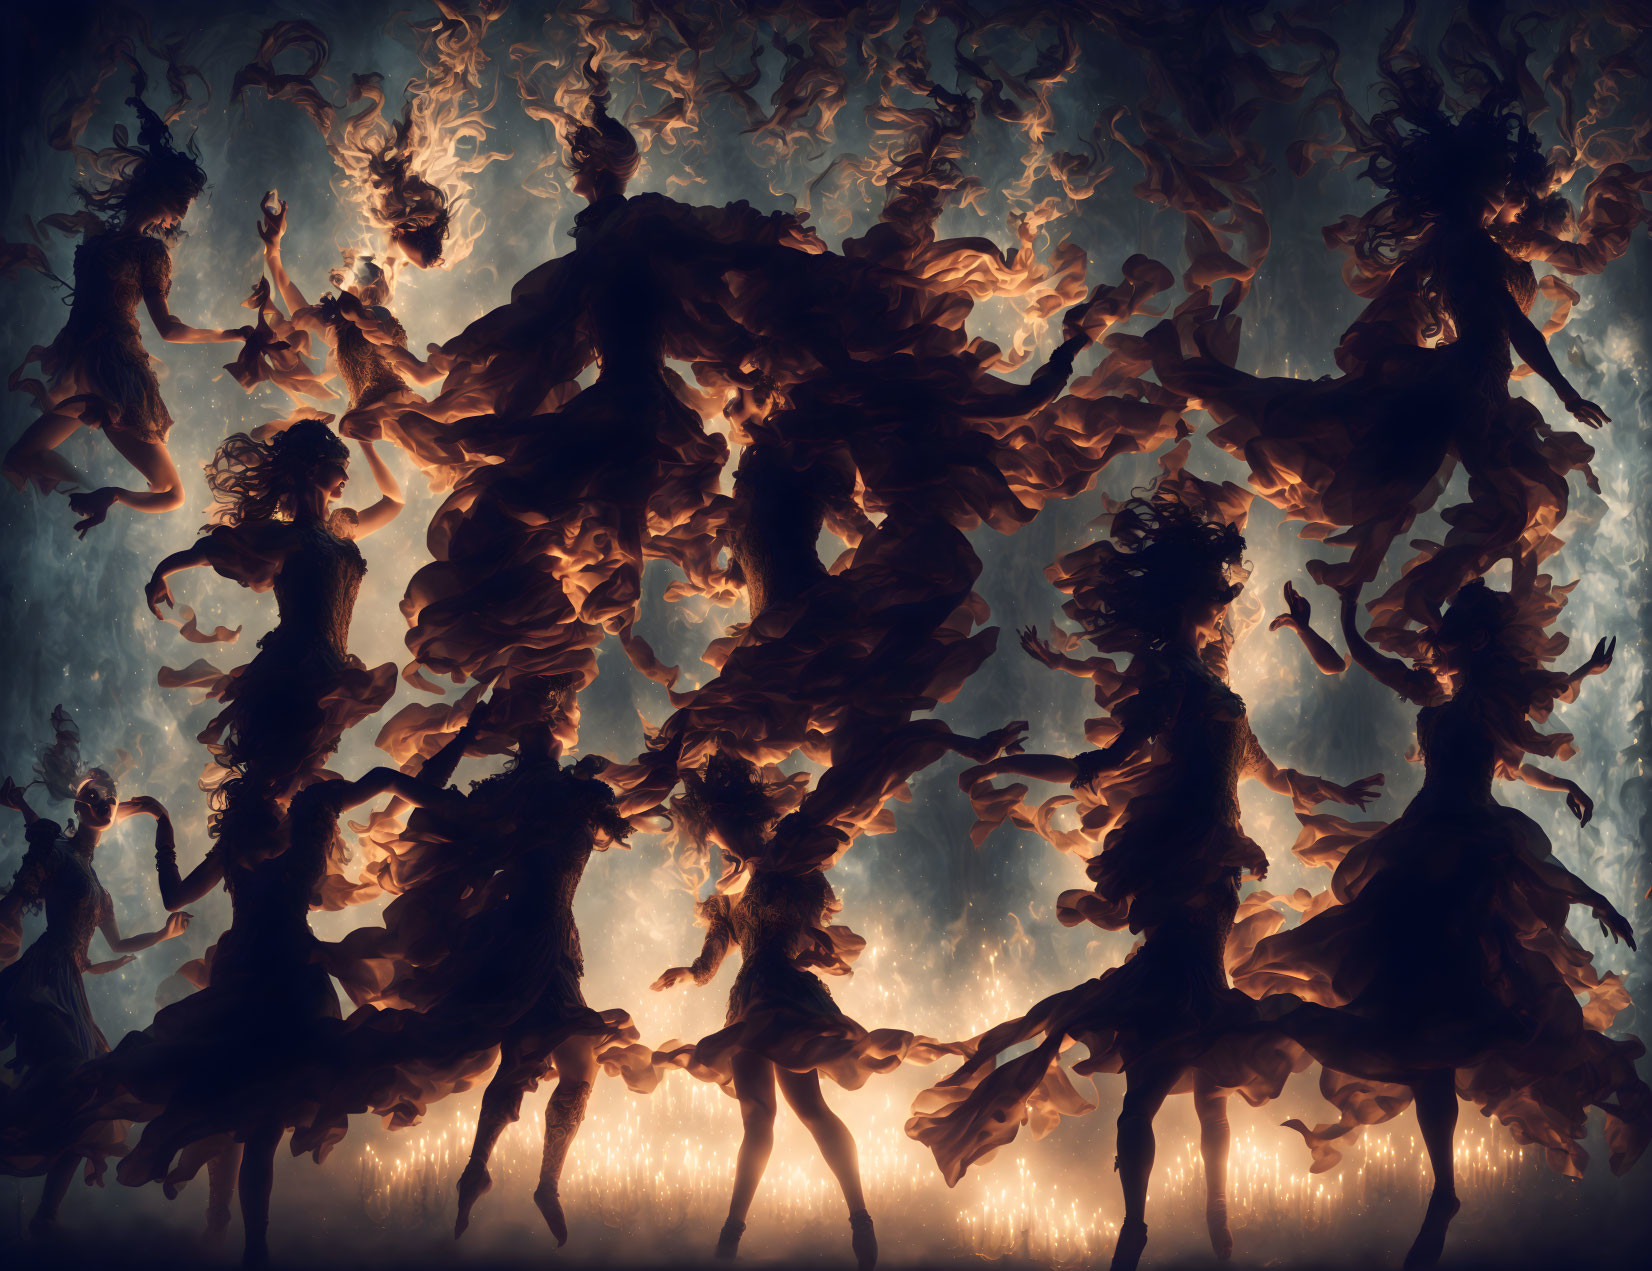 Multiple dancers in mid-motion against smoky backdrop with ethereal glow